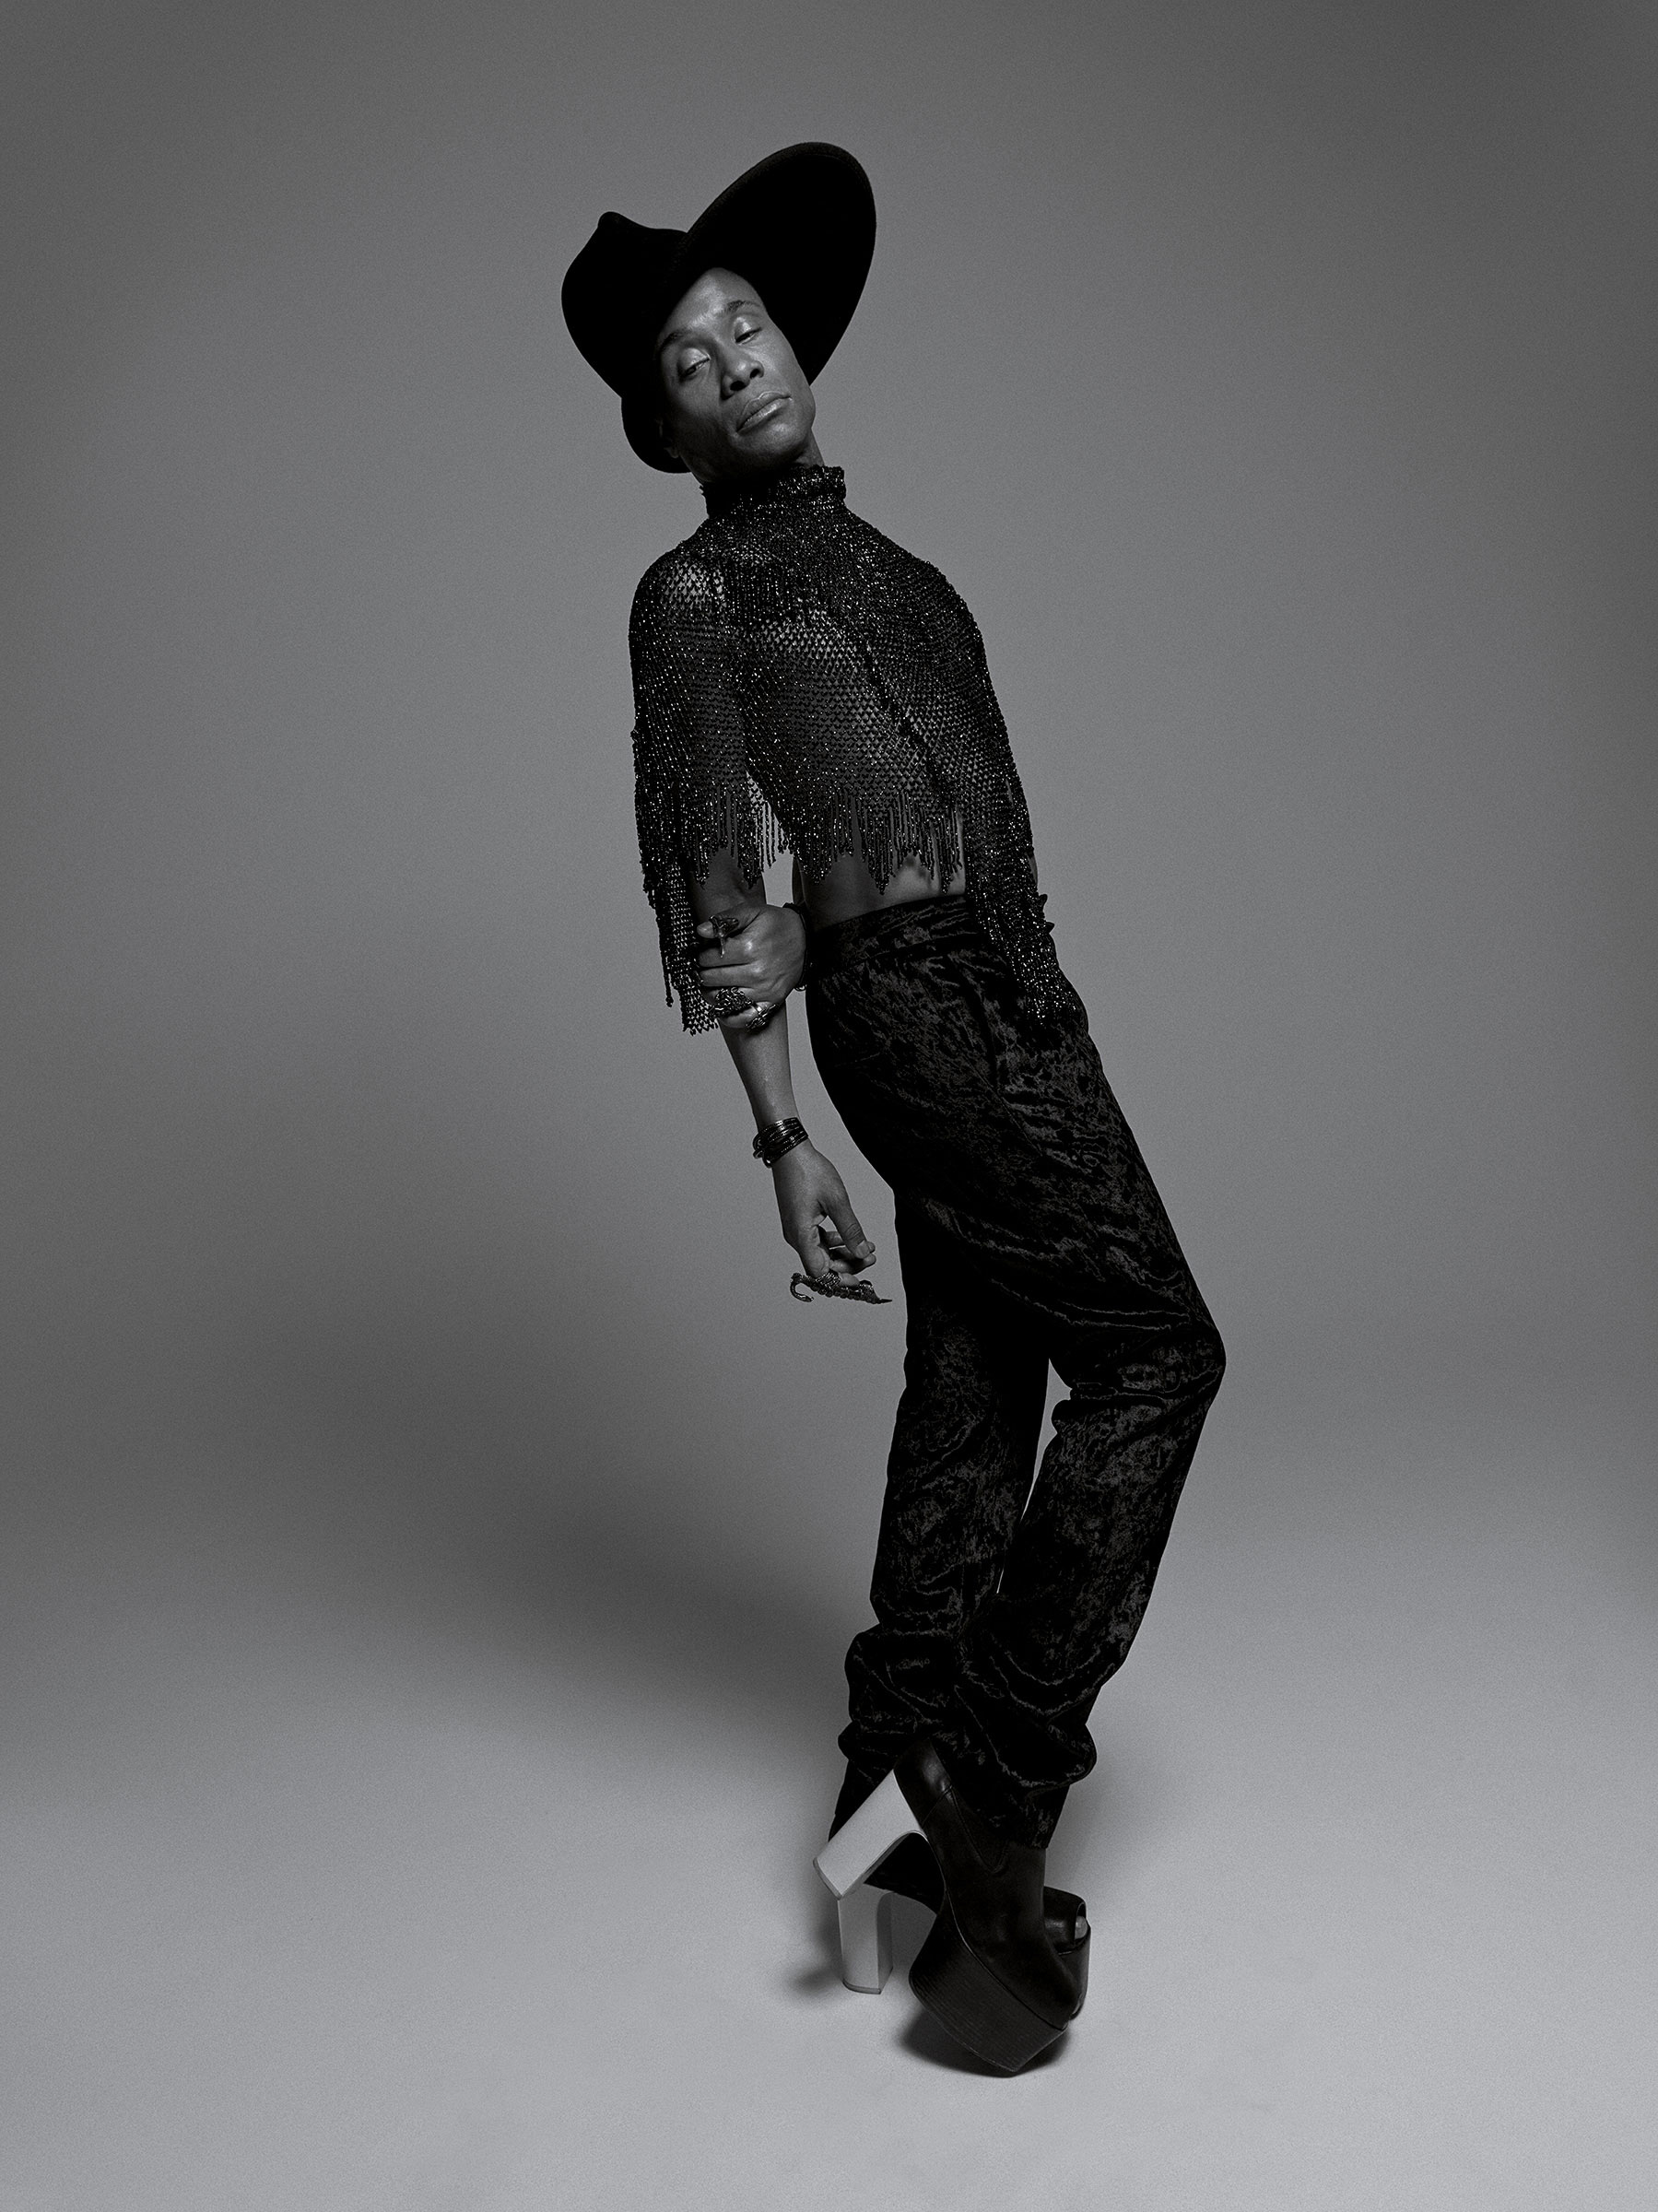 TIME 100 Icons: Billy Porter